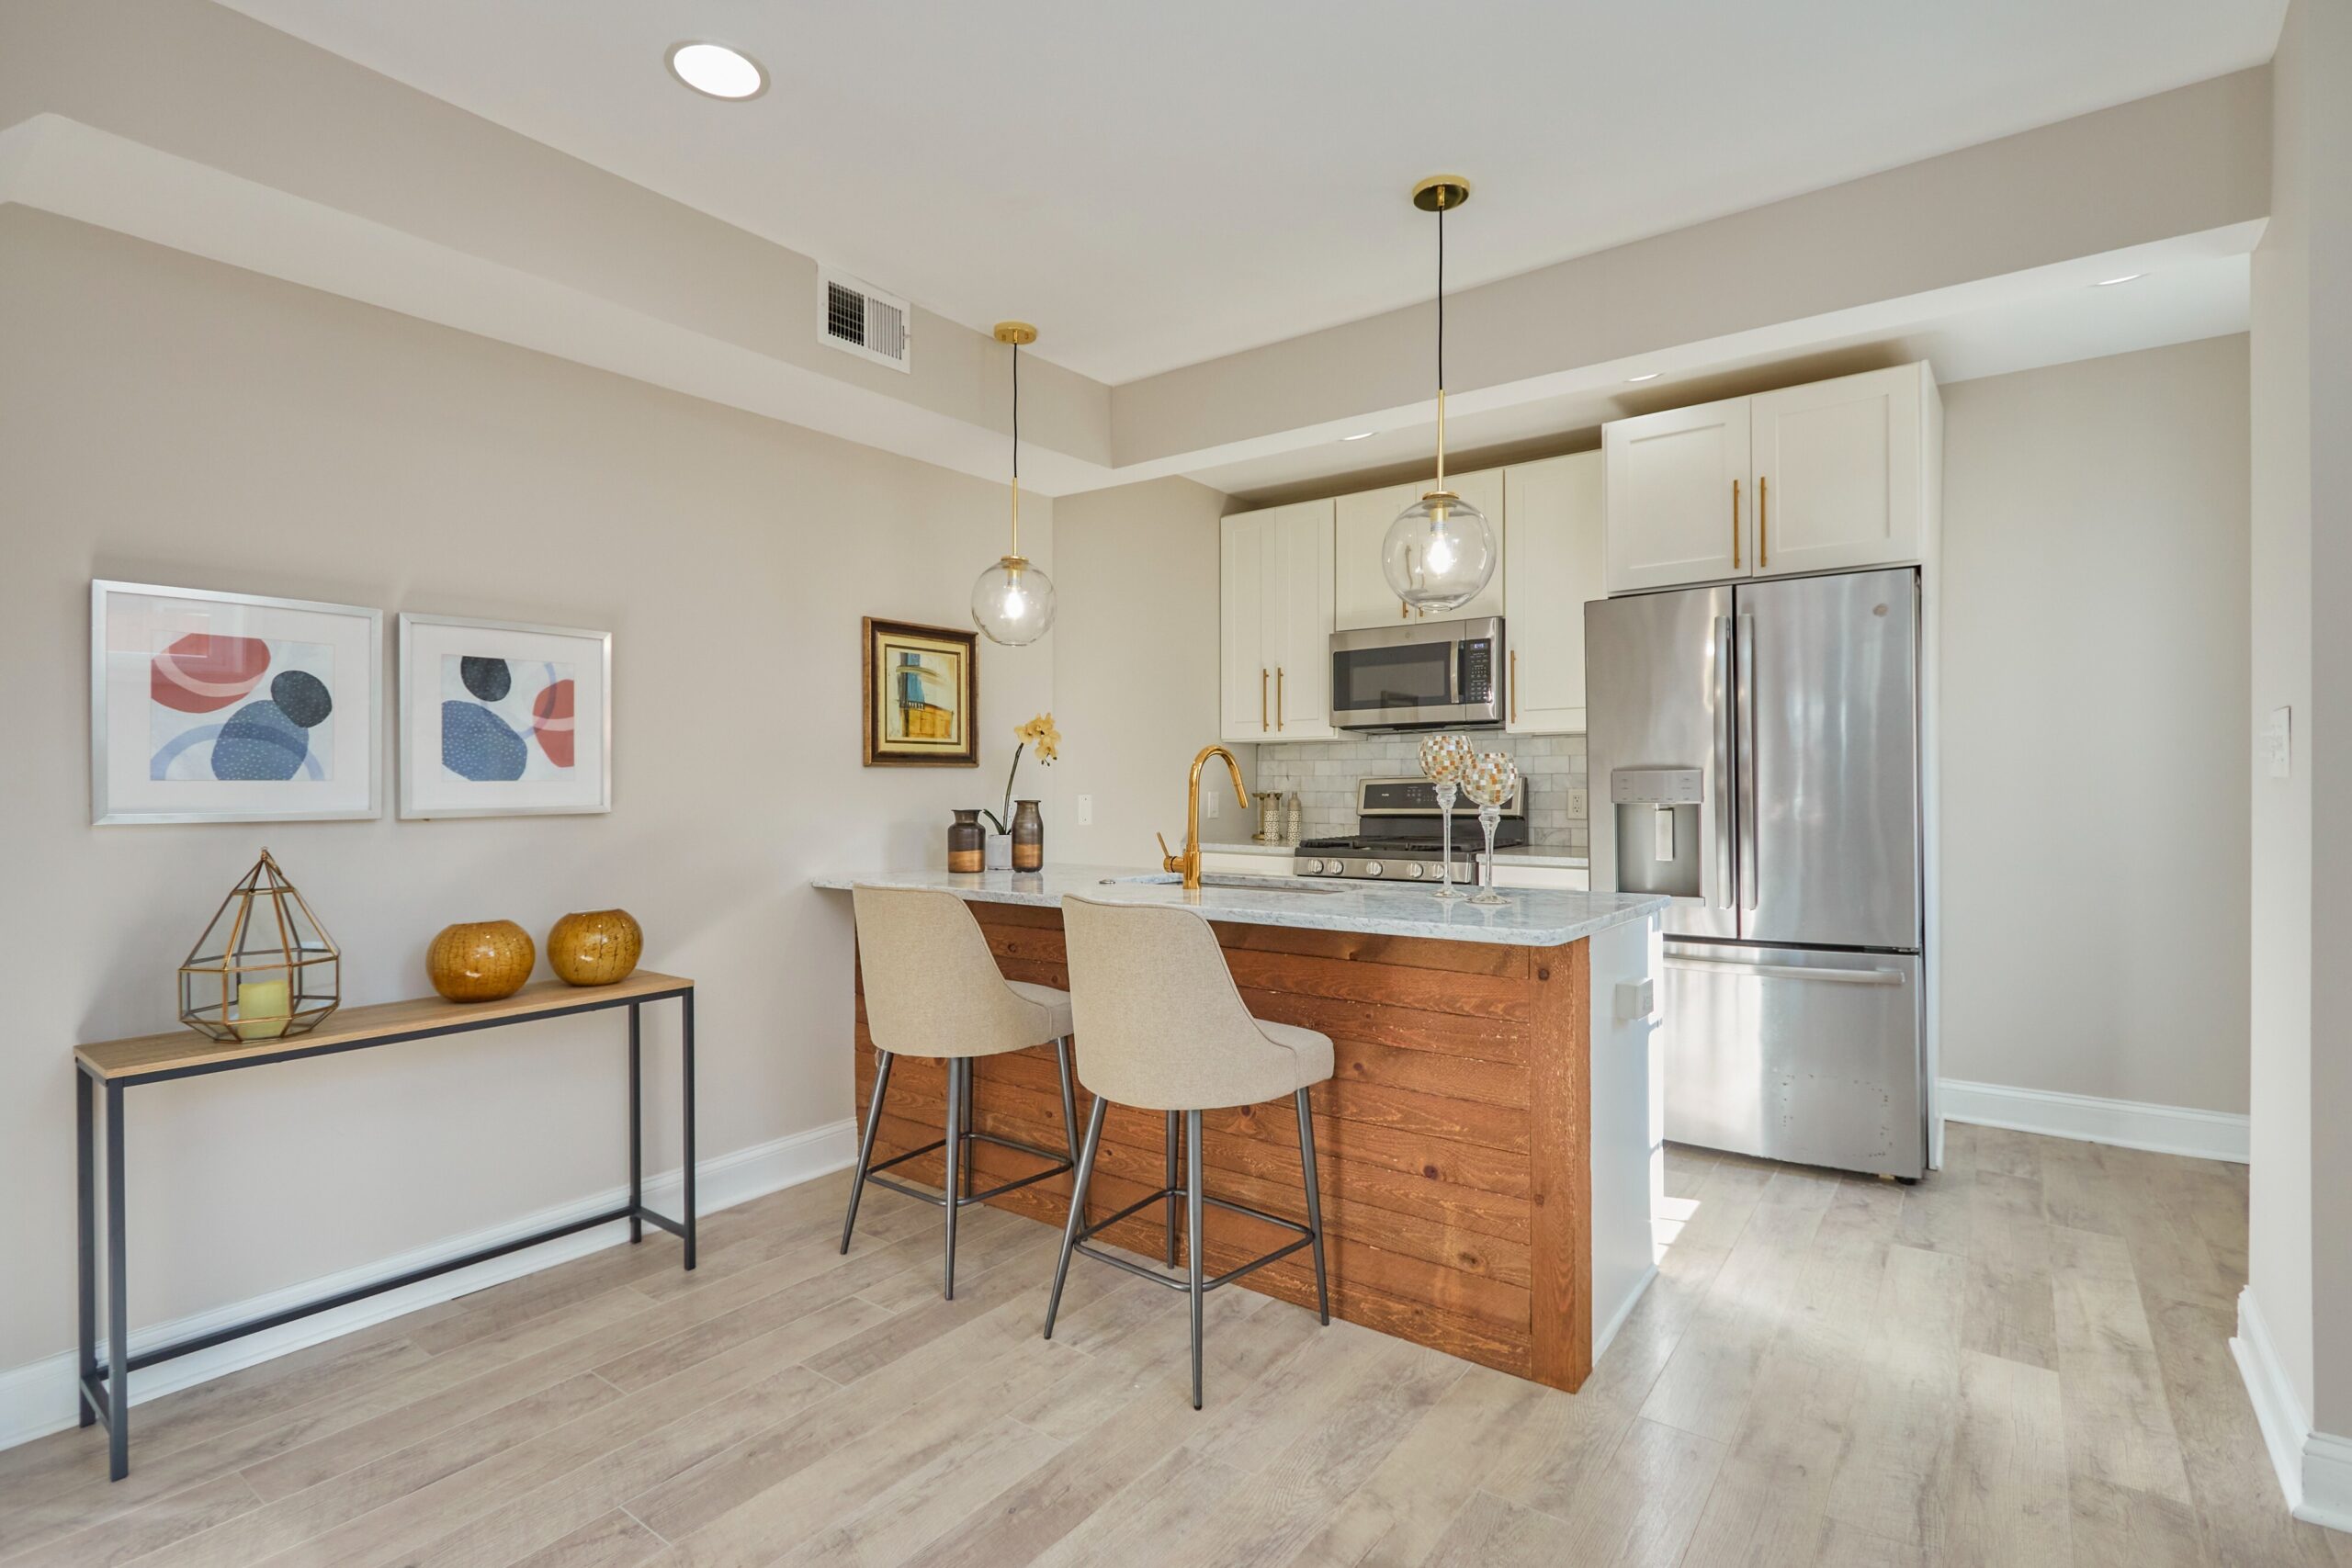 Professional interior photo of 1219 50th St NE in Washington, DC - showing the fully remodeled kitchen with quartz countertop island/peninsula and bar with white cabinets, stainless appliances and brushed cold hardware